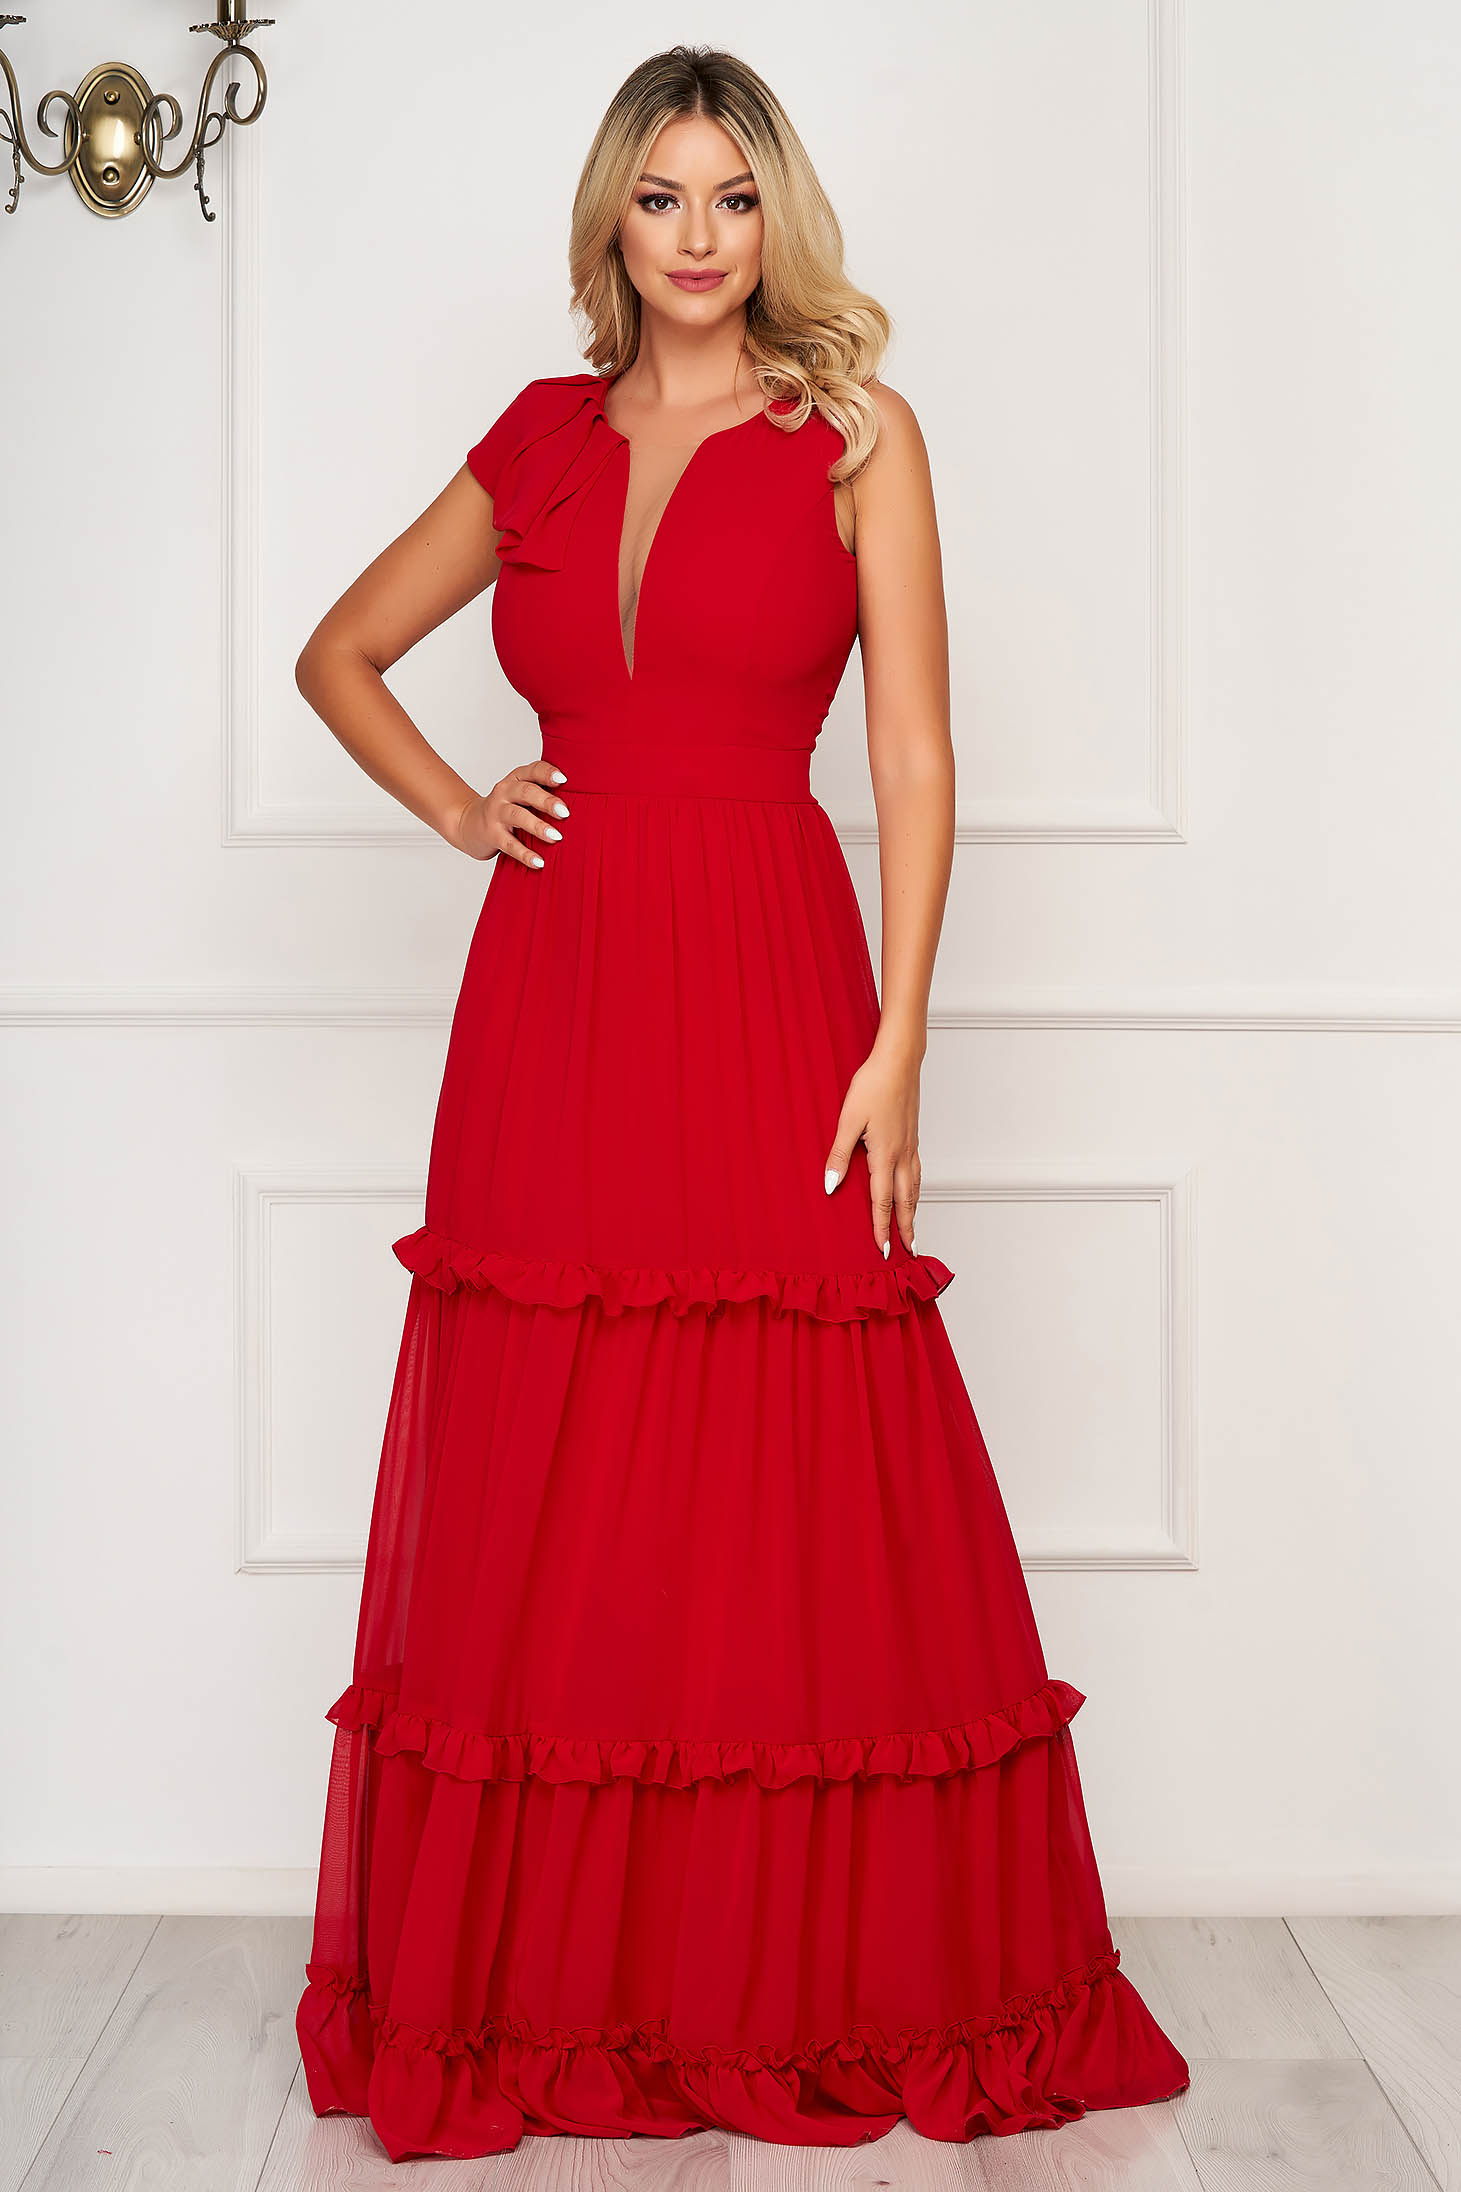 Red dress with v-neckline with ruffle details from veil fabric